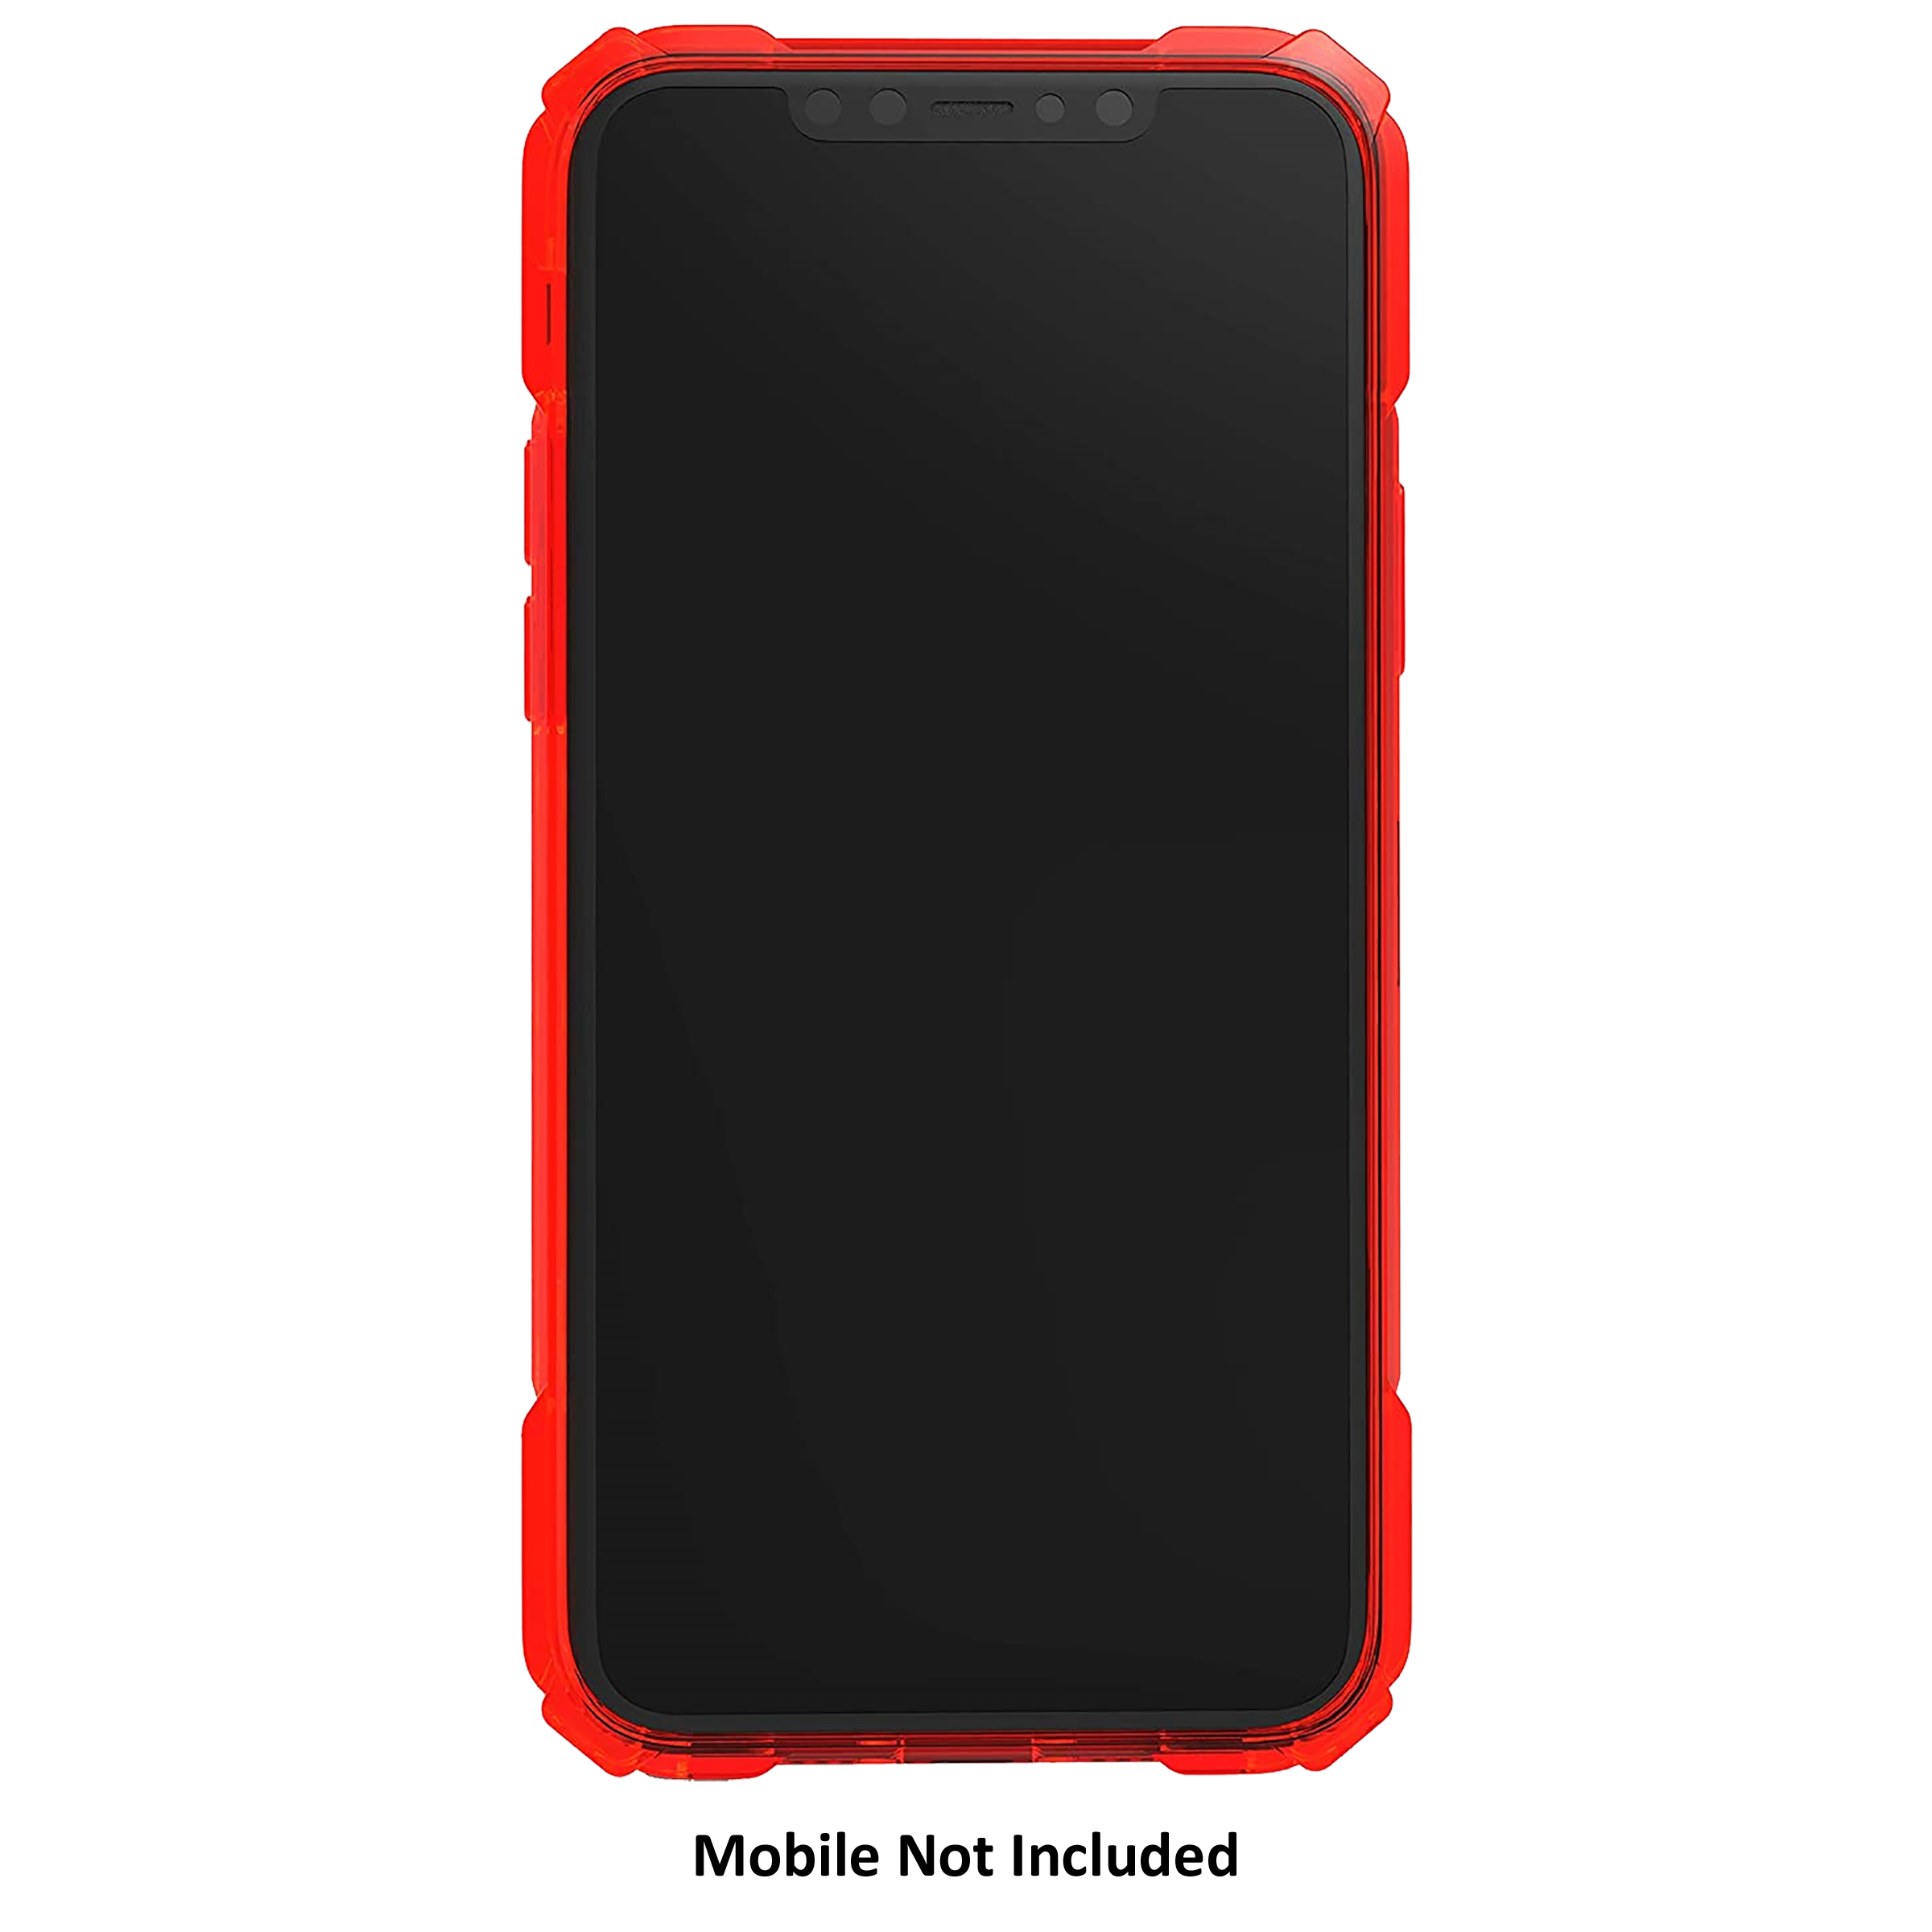 Element Case Rally Polycarbonate Back Case For iPhone 11 (Mil-Spec Drop Protection, EMT-322-225F-03, Red)_2